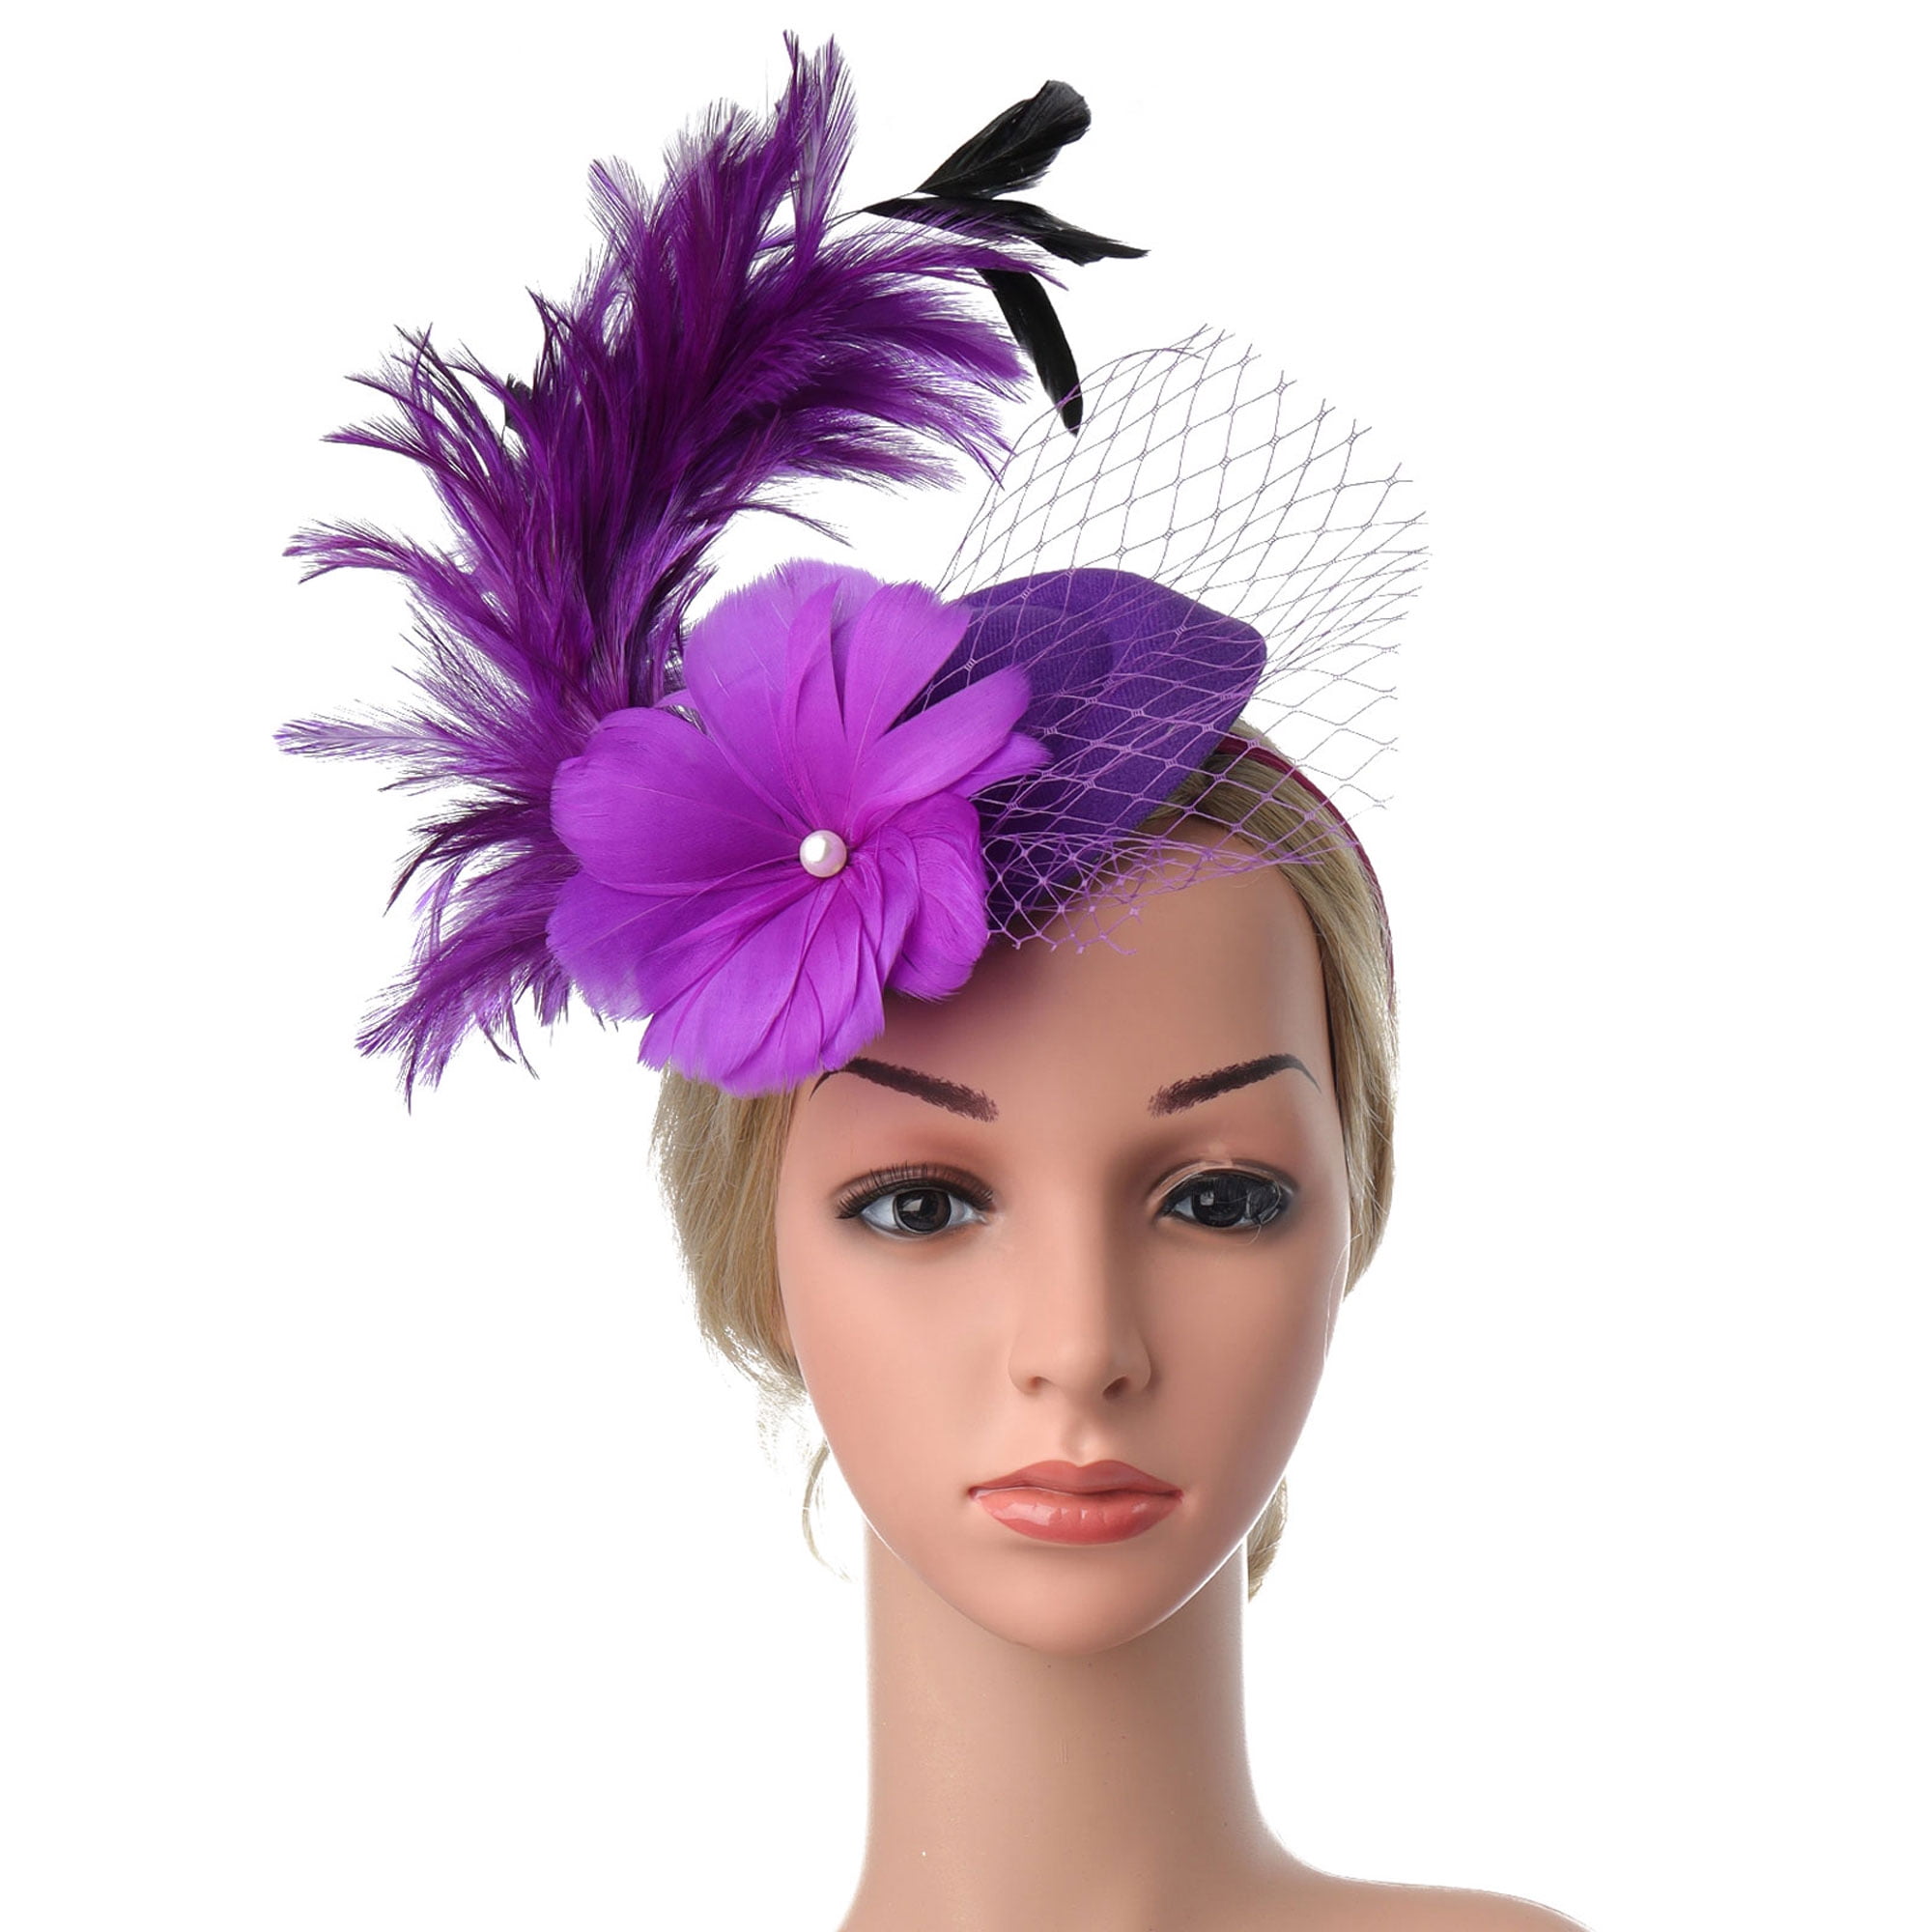 Dusky Pink Feather Comb Fascinator Wedding Races Proms Bridal Hair Accessory 3 